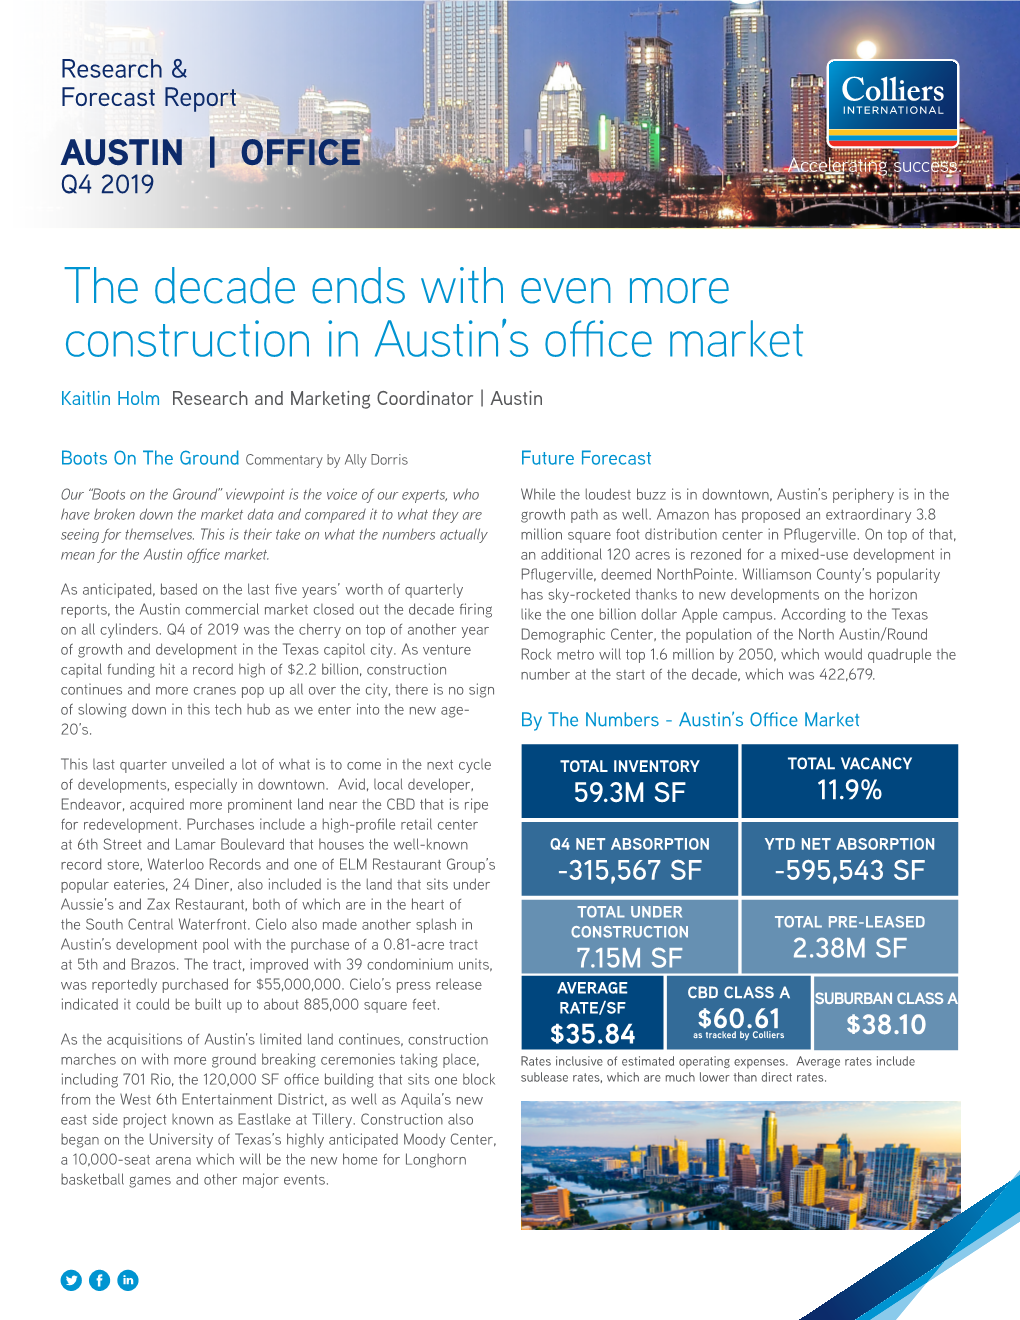 The Decade Ends with Even More Construction in Austin's Office Market